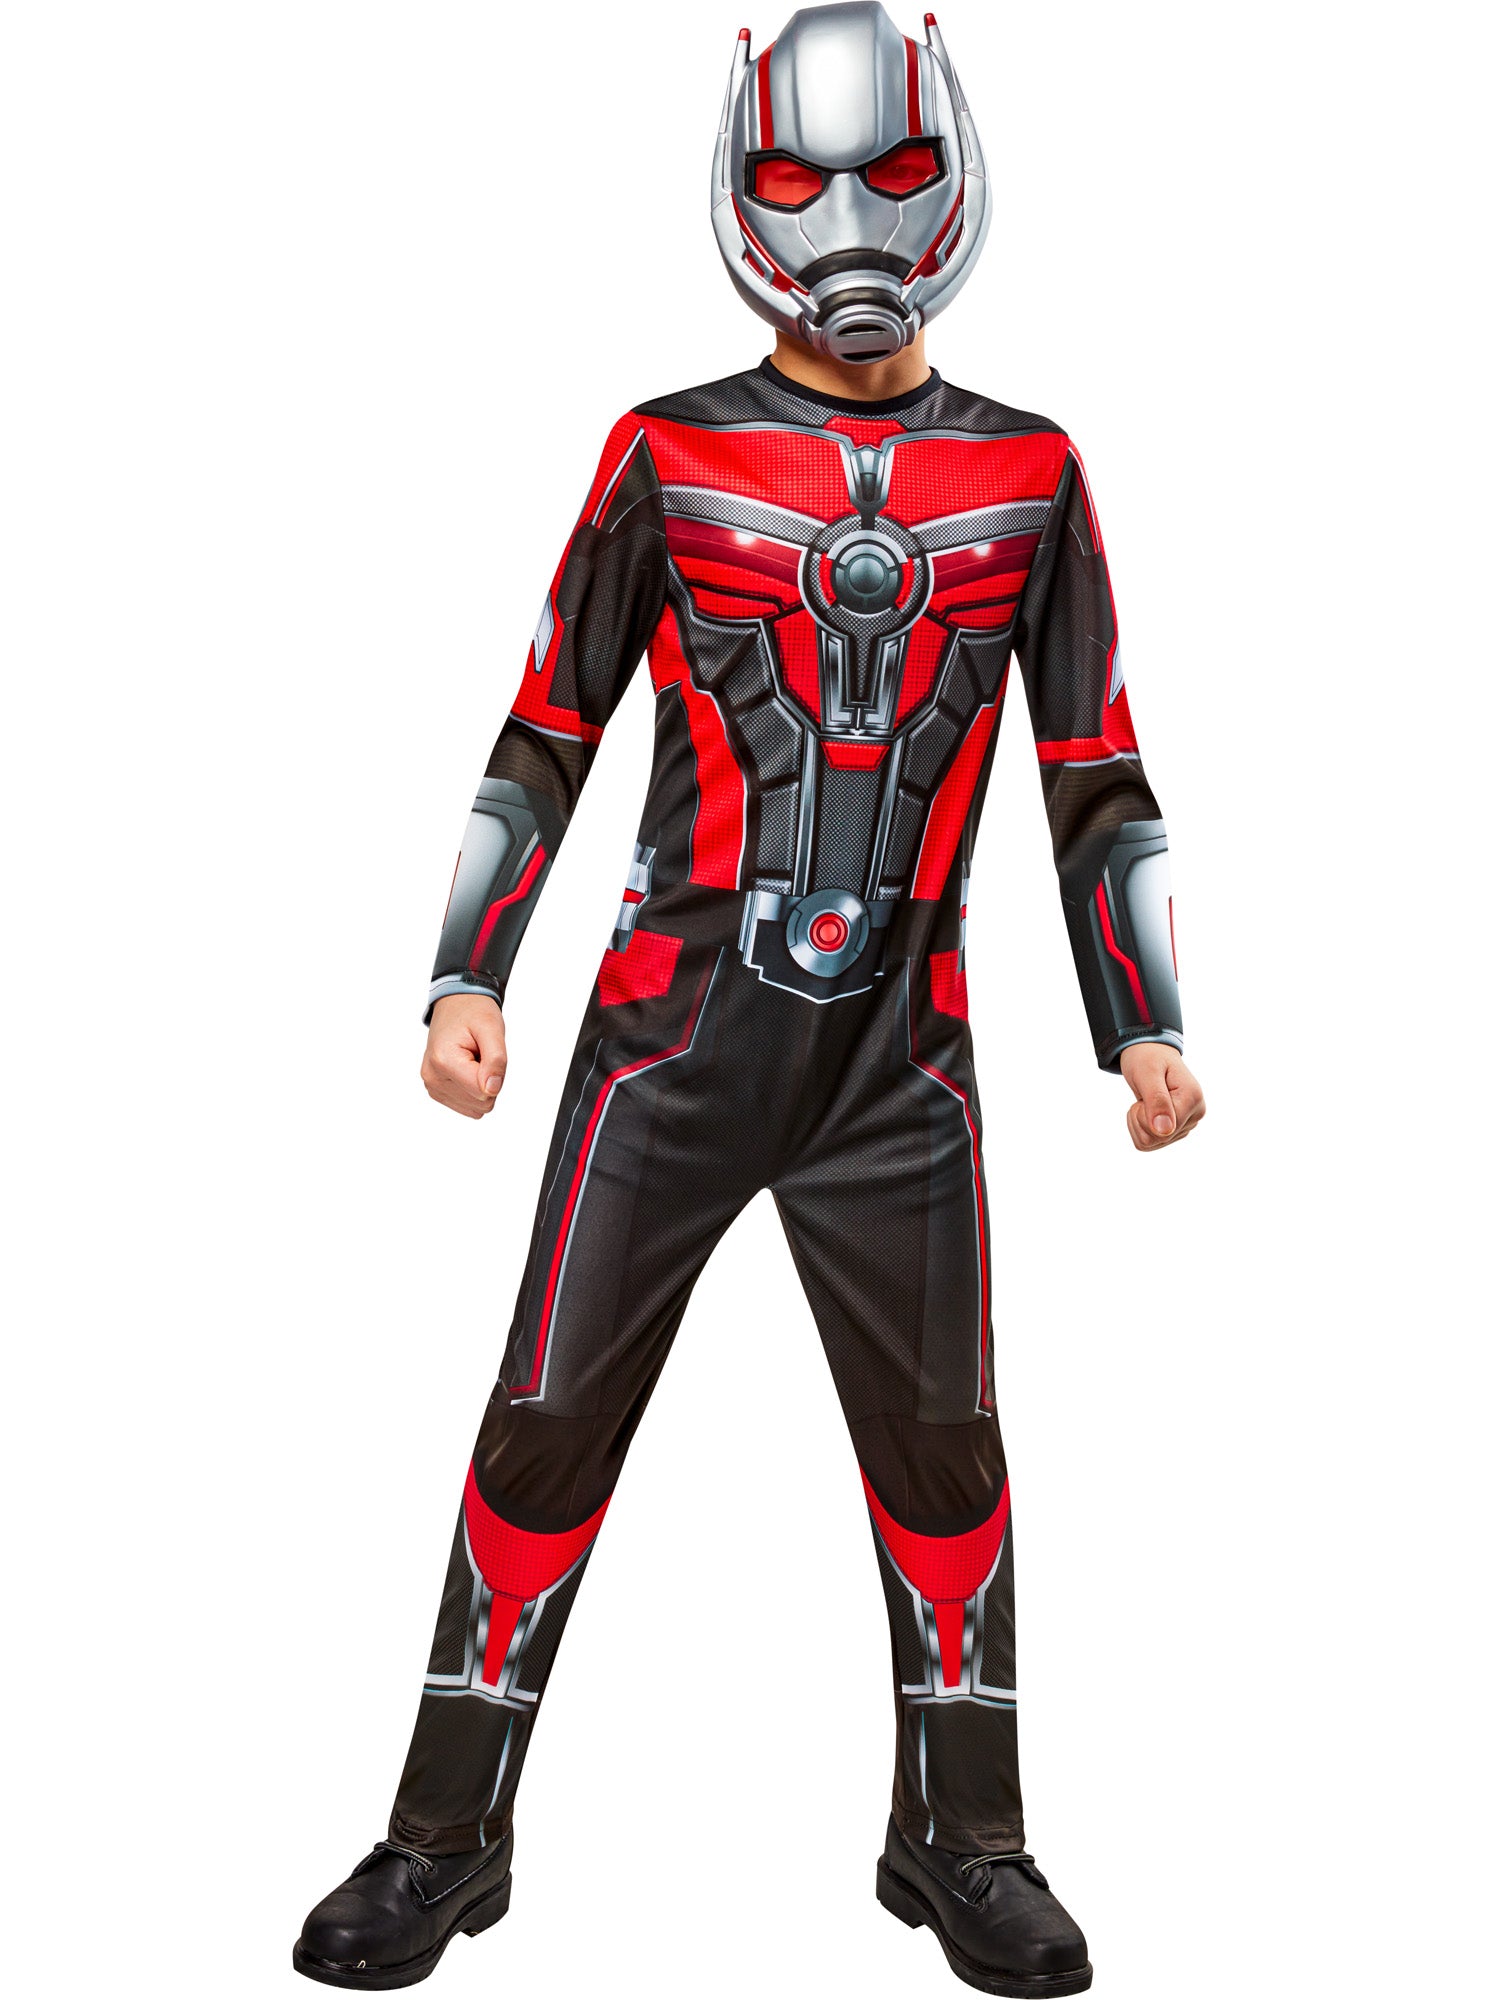 Ant-Man, Ant-Man and the Wasp: Quantumania, Ant-Man Quantumania, Ant-Man and the Wasp: Quantumania, Marvel, Children's Costumes, S, Front